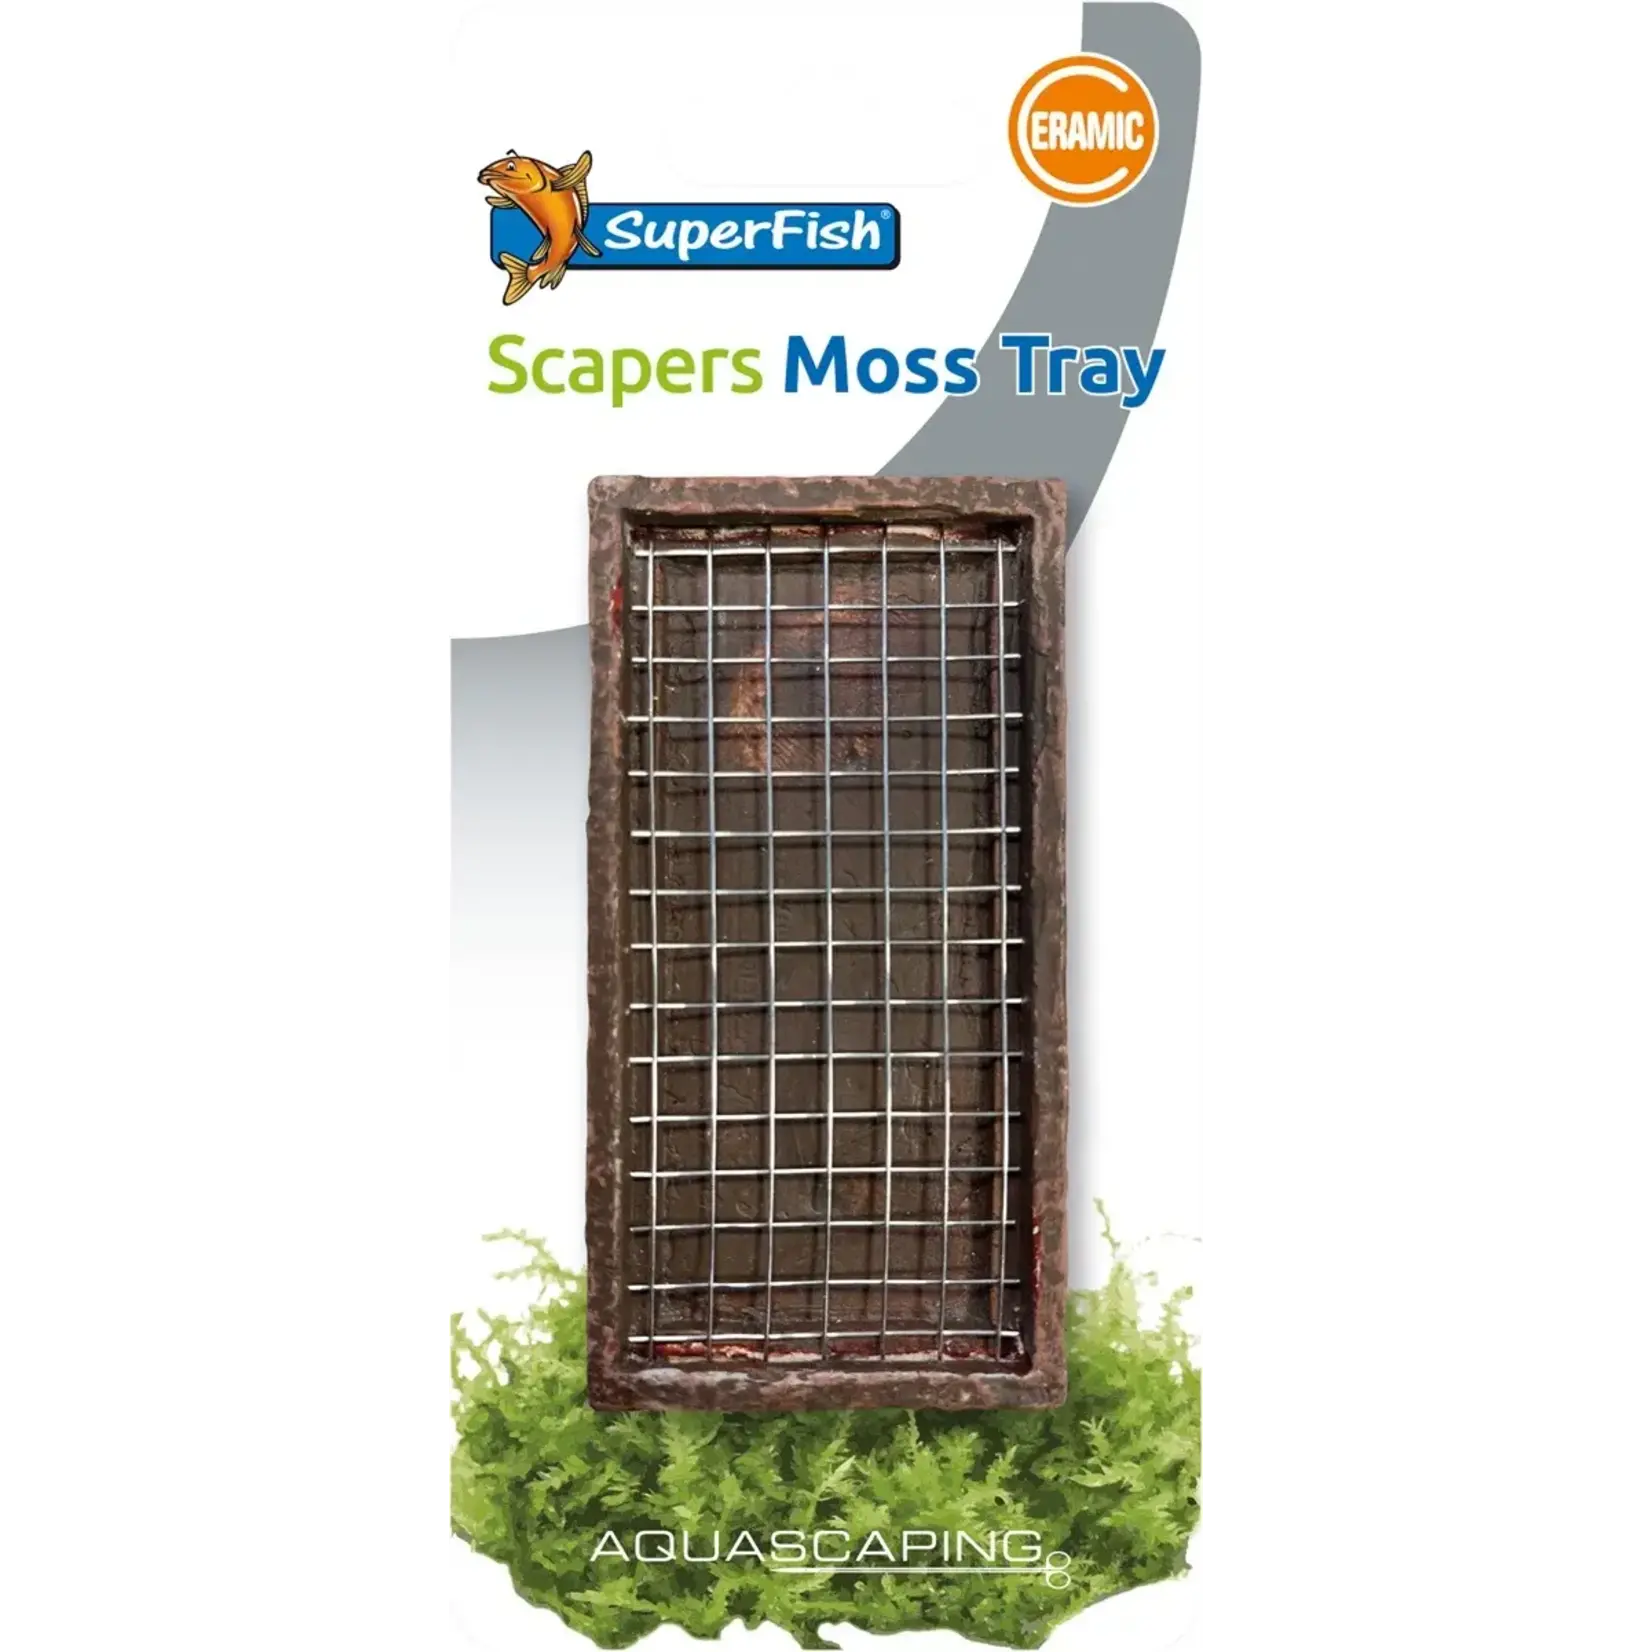 SuperFish Scapers moss tray